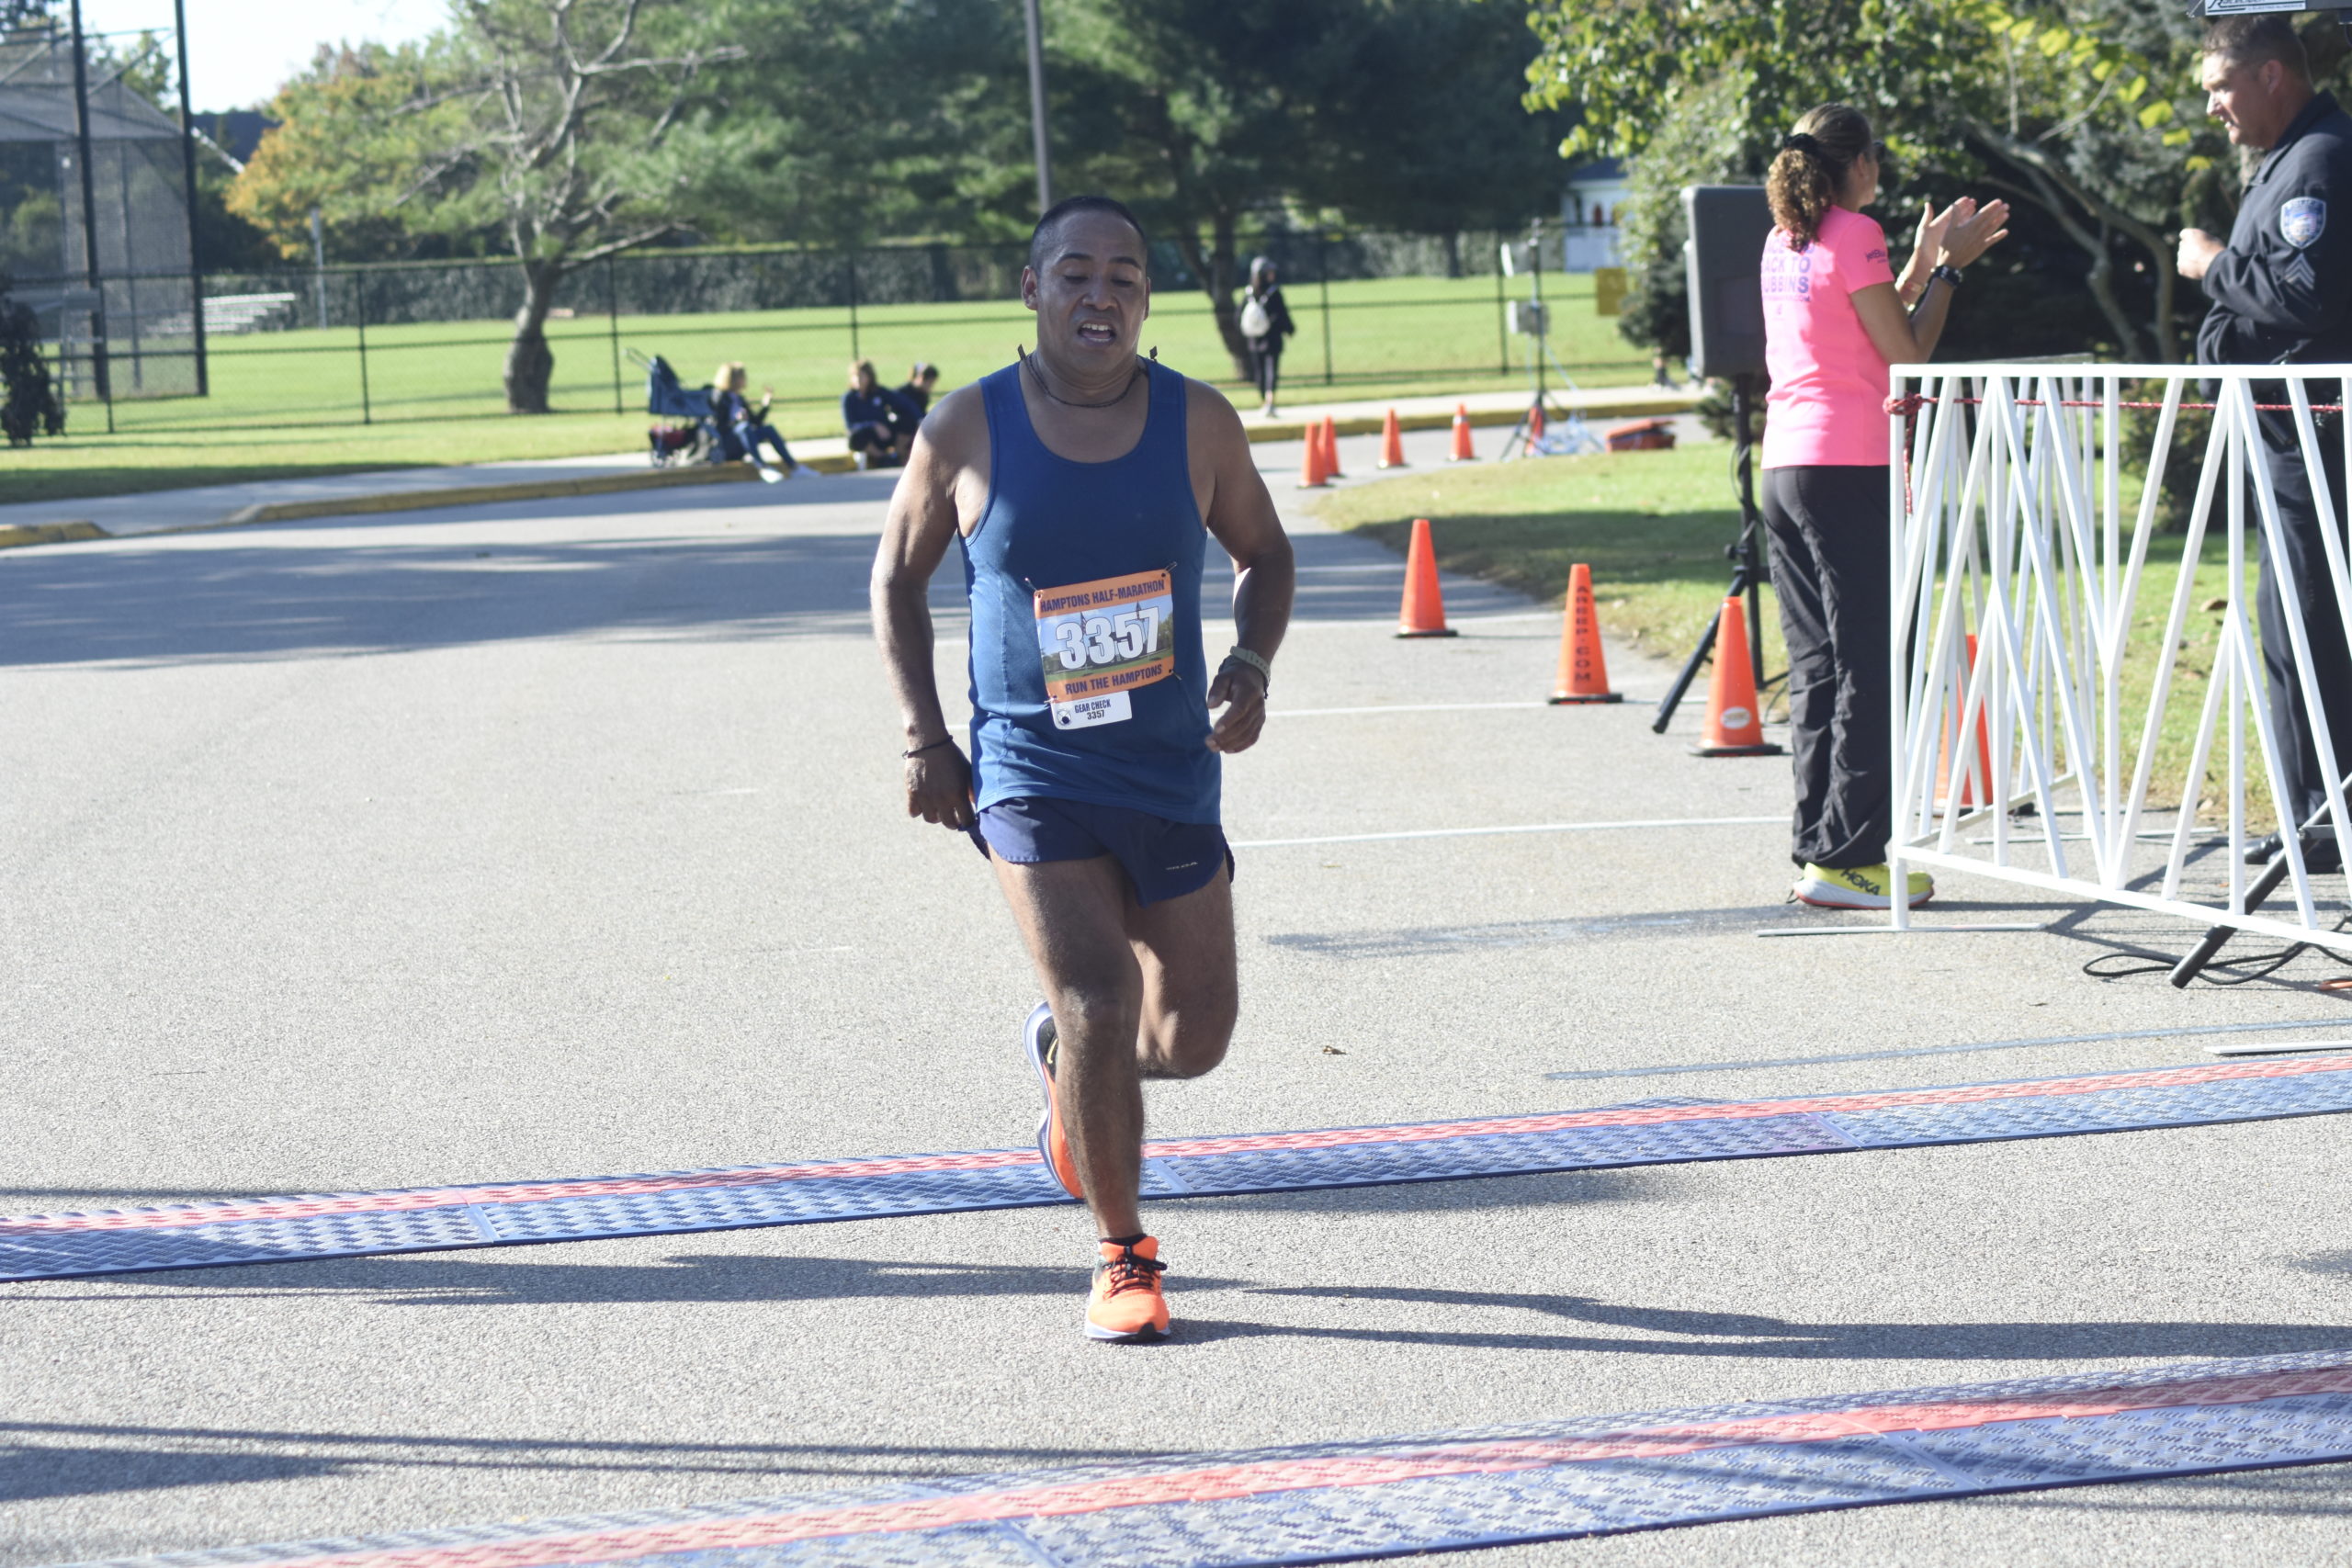 Miguel Morastitla of Southampton placed 12th overall in the Hamptons Half Marathon.